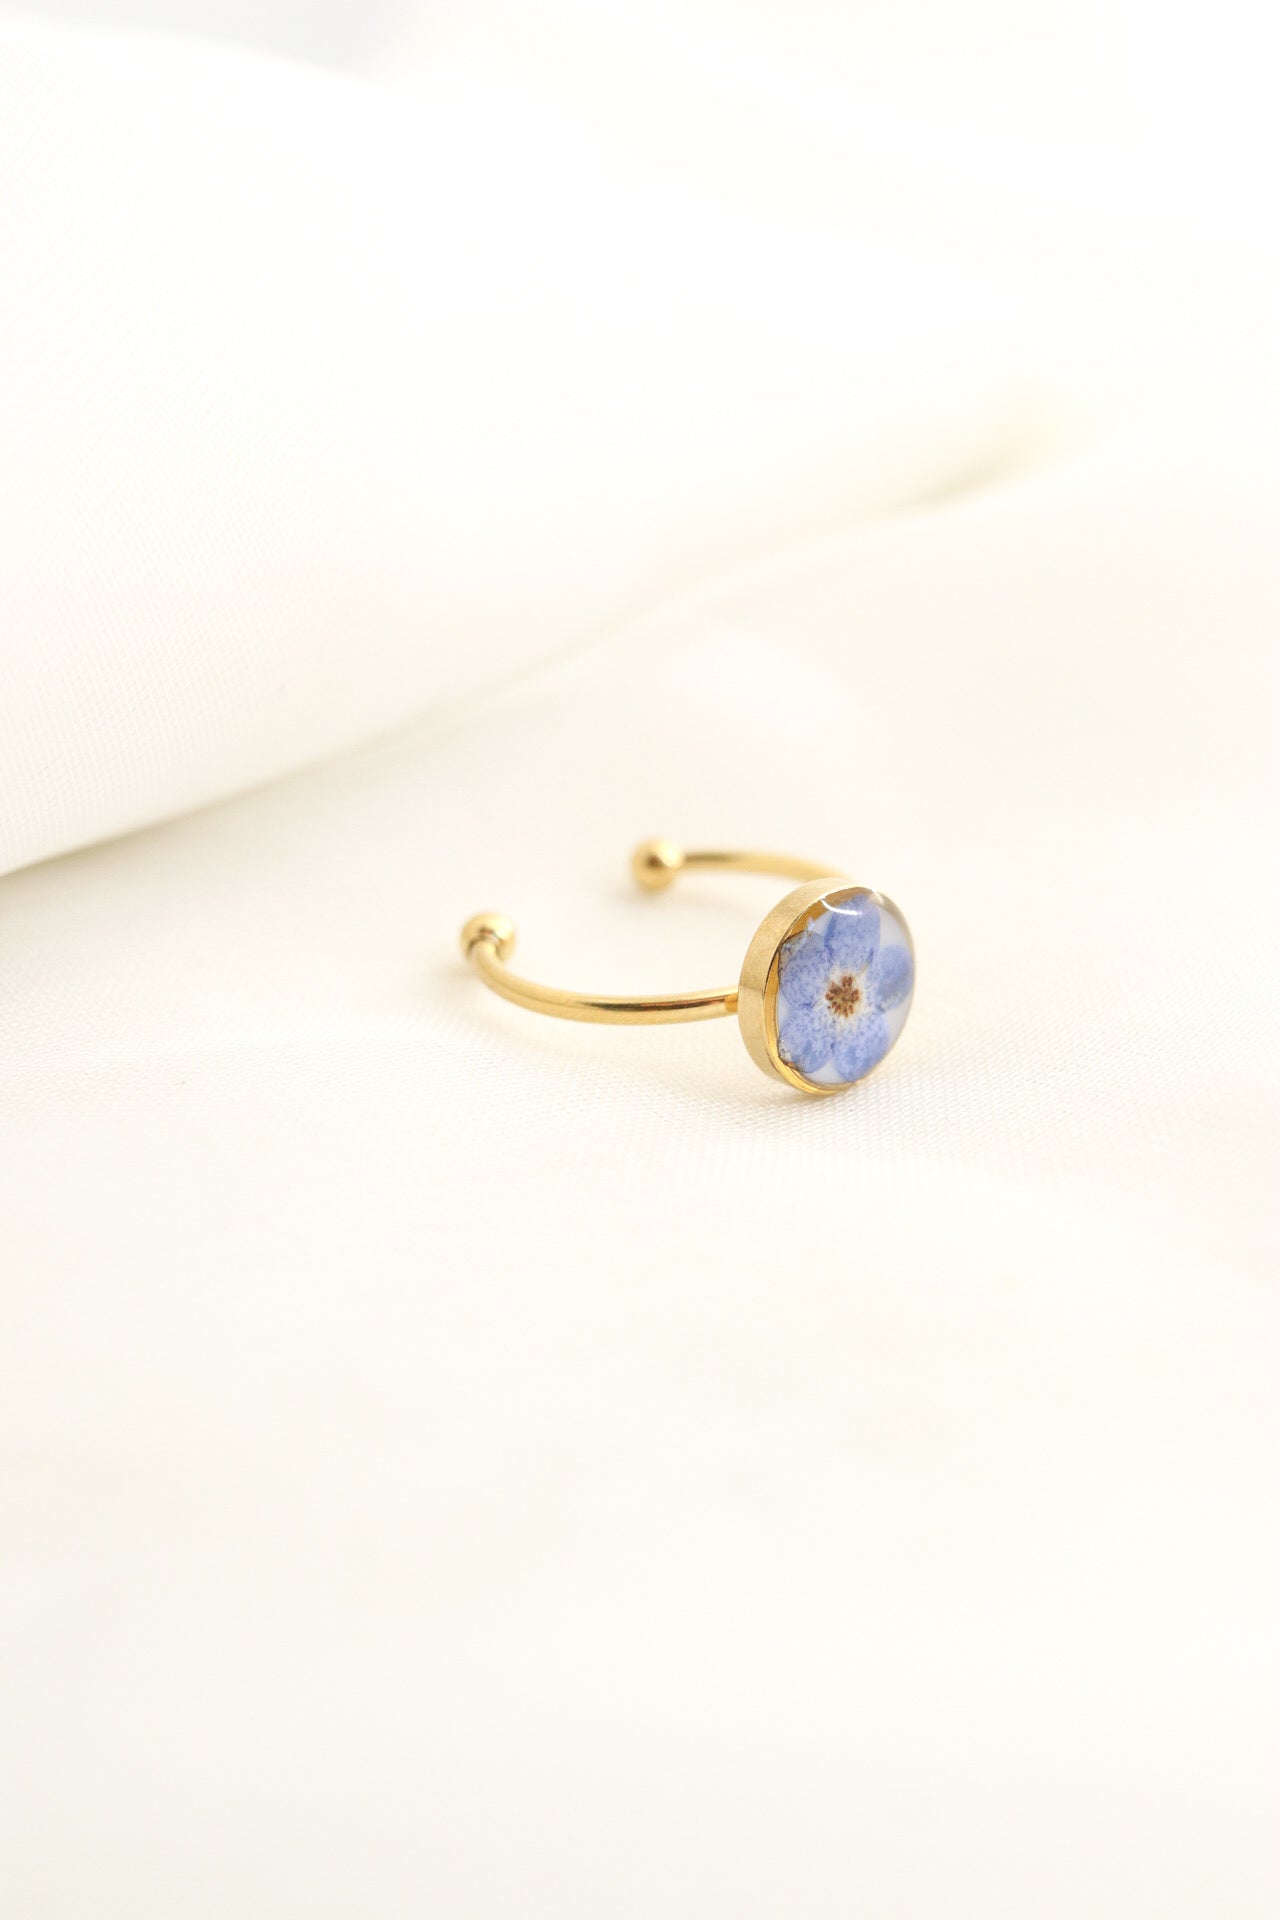 Forget Me Not Wildflower Resin Ring, Adjustable Blue Pressed Flower Ring, Blue Blossom Botanical Ring Christmas Gift For Her Copy